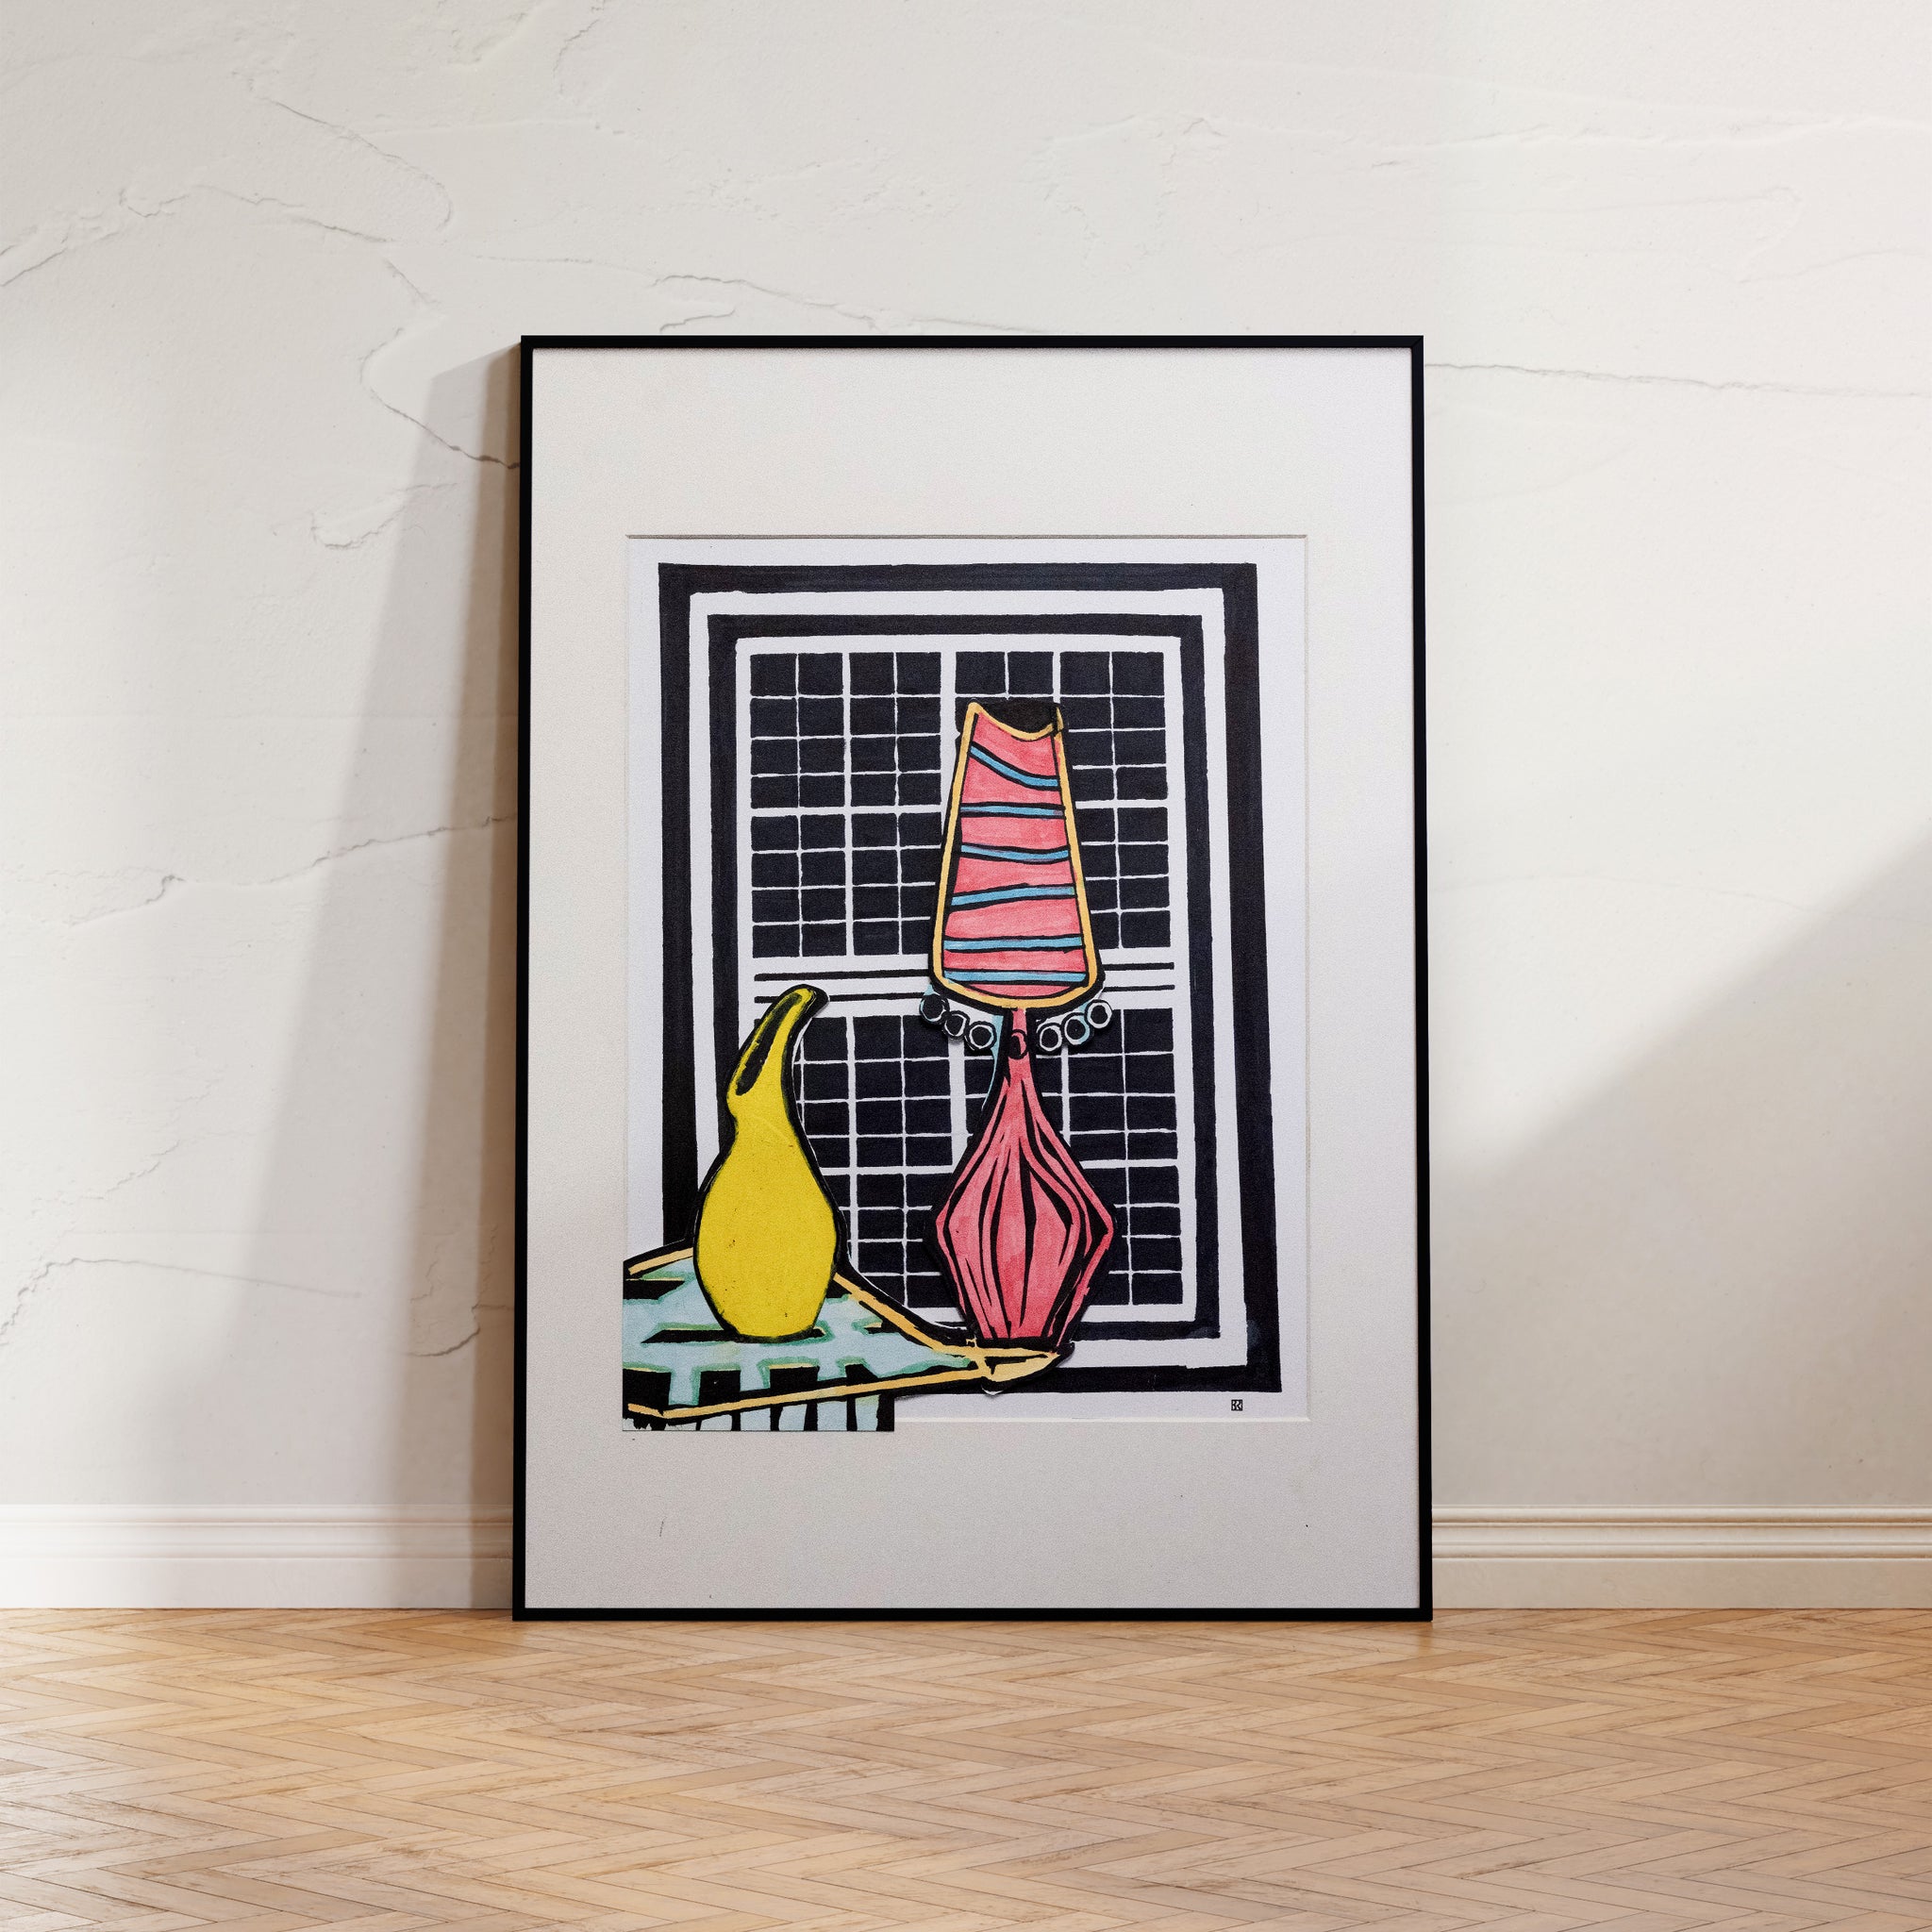 Modern art painting 'Illuminated Tableau' by Brian Findleton, featuring a yellow vase, a lamp, and a blue vase in bold outlines and luminous colors.